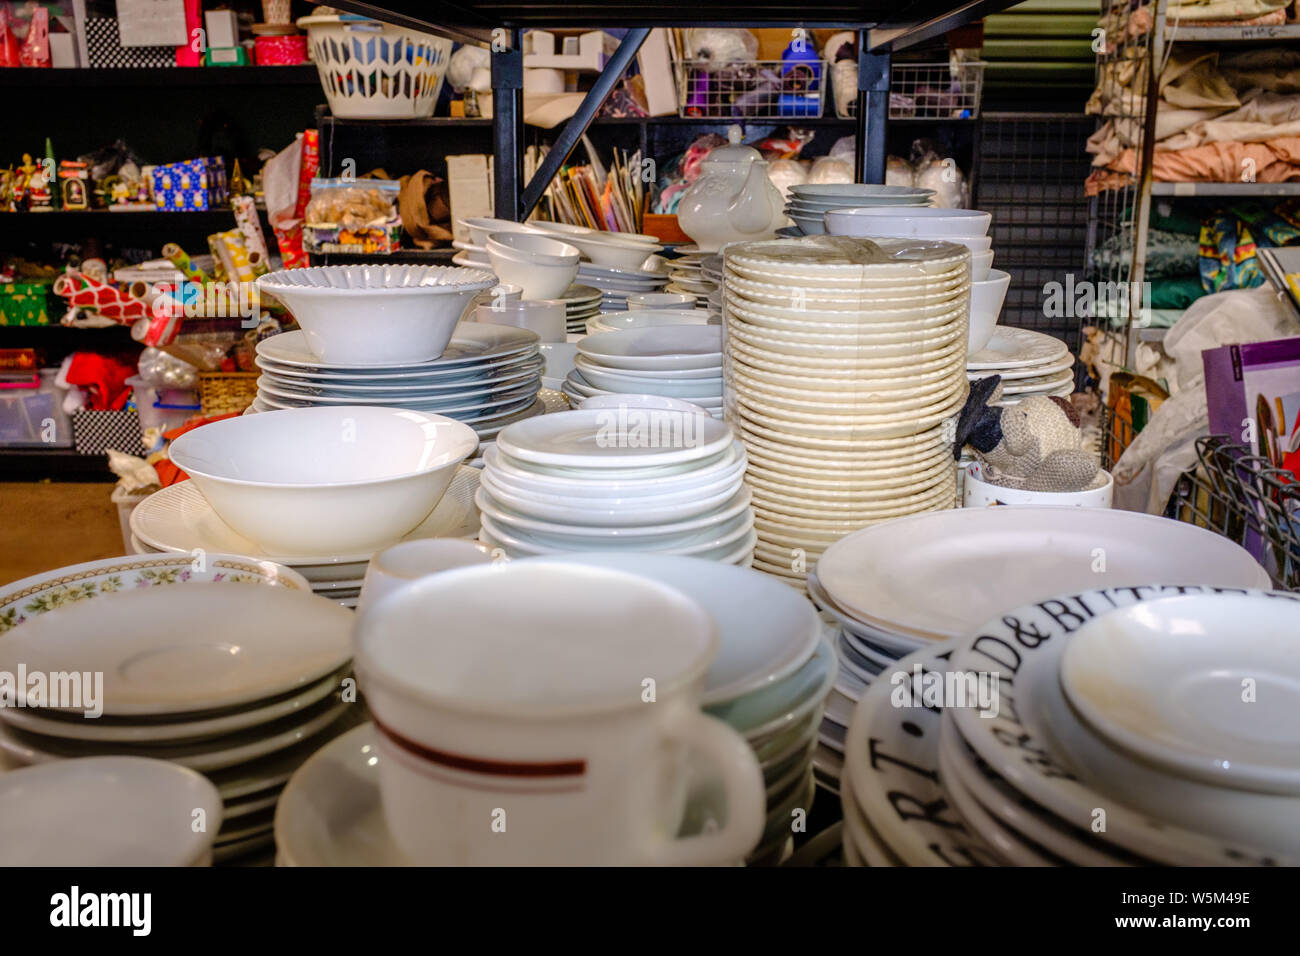 Piles of plates, crockery and ceramics on shelves in charity shop interior view, charity chic for up cycle, recycle, reuse and re purpose. Stock Photo